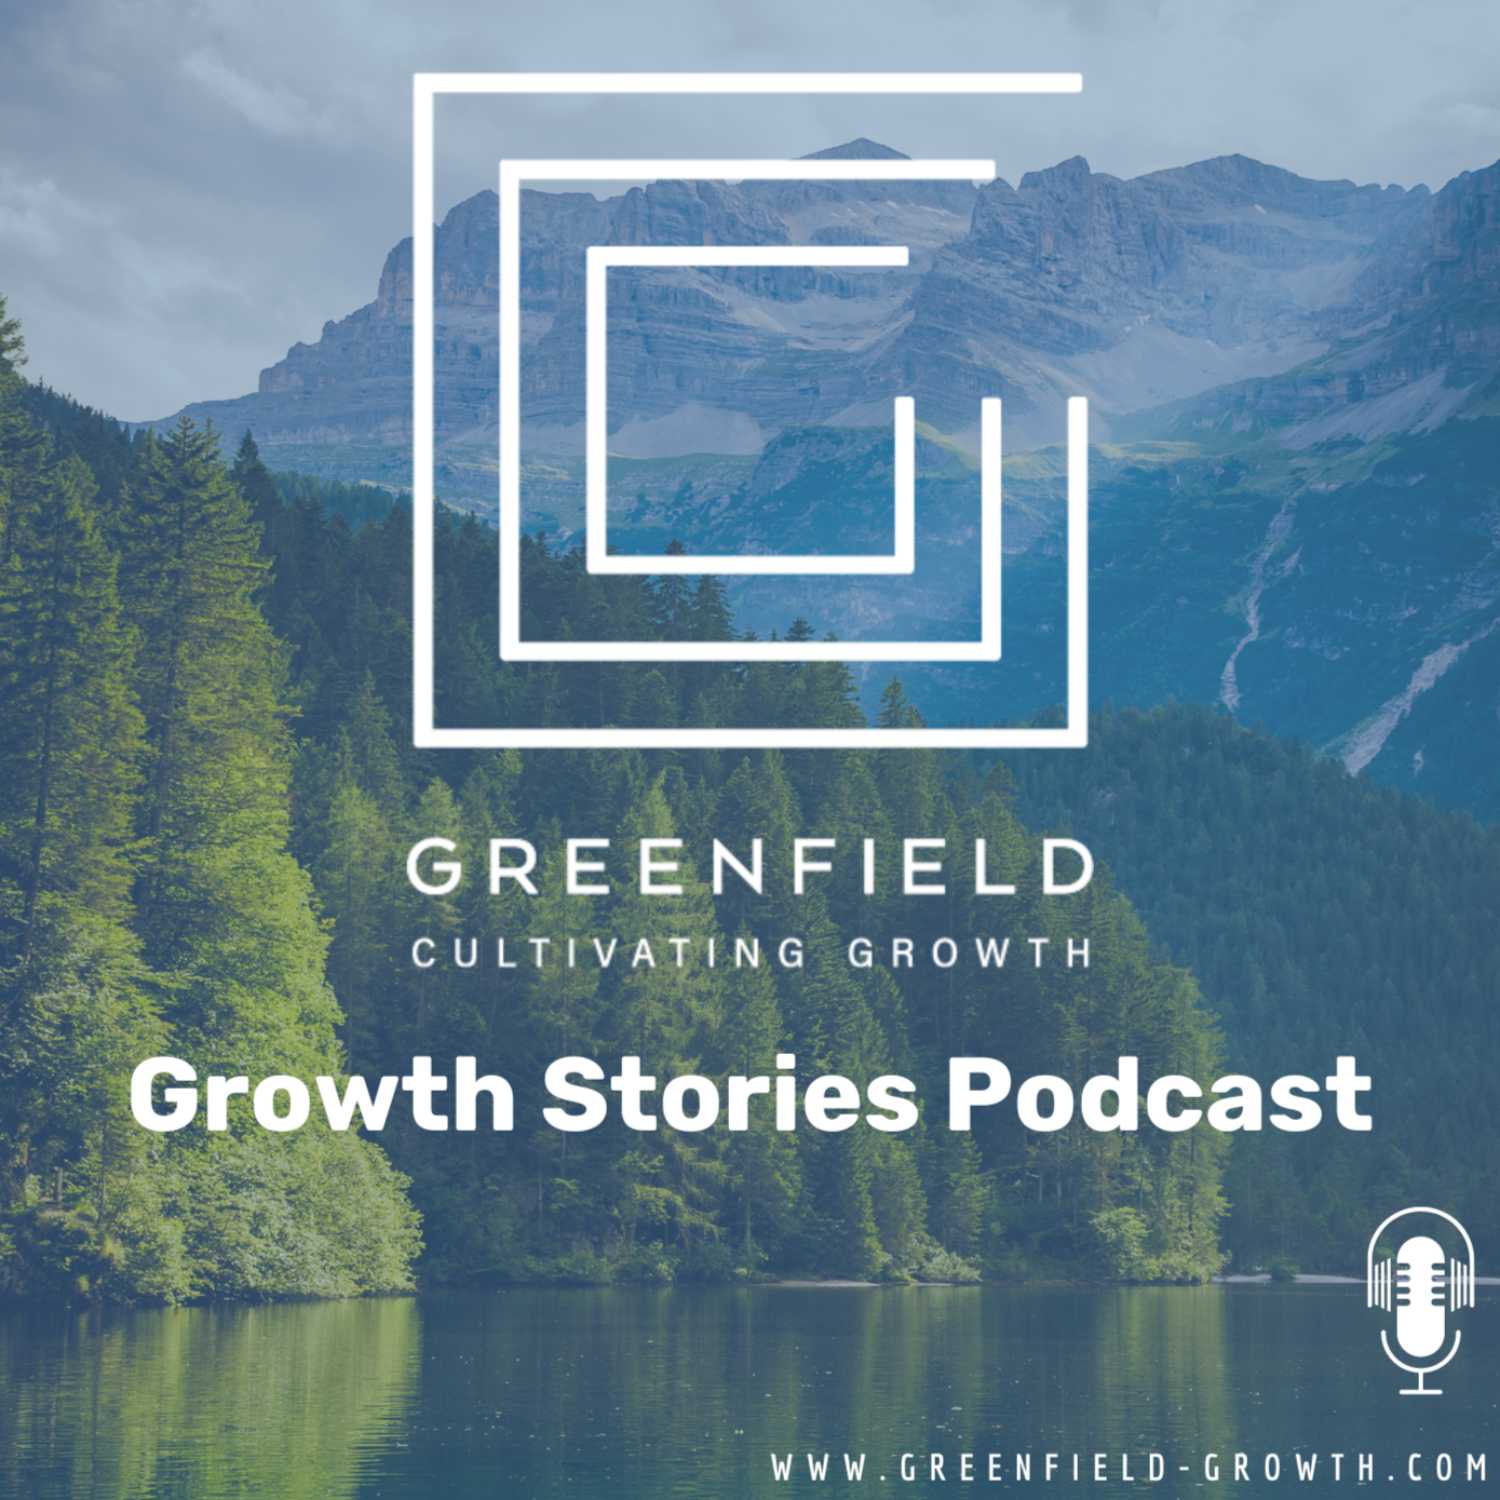 The Growth Stories Podcast by Greenfield Partners